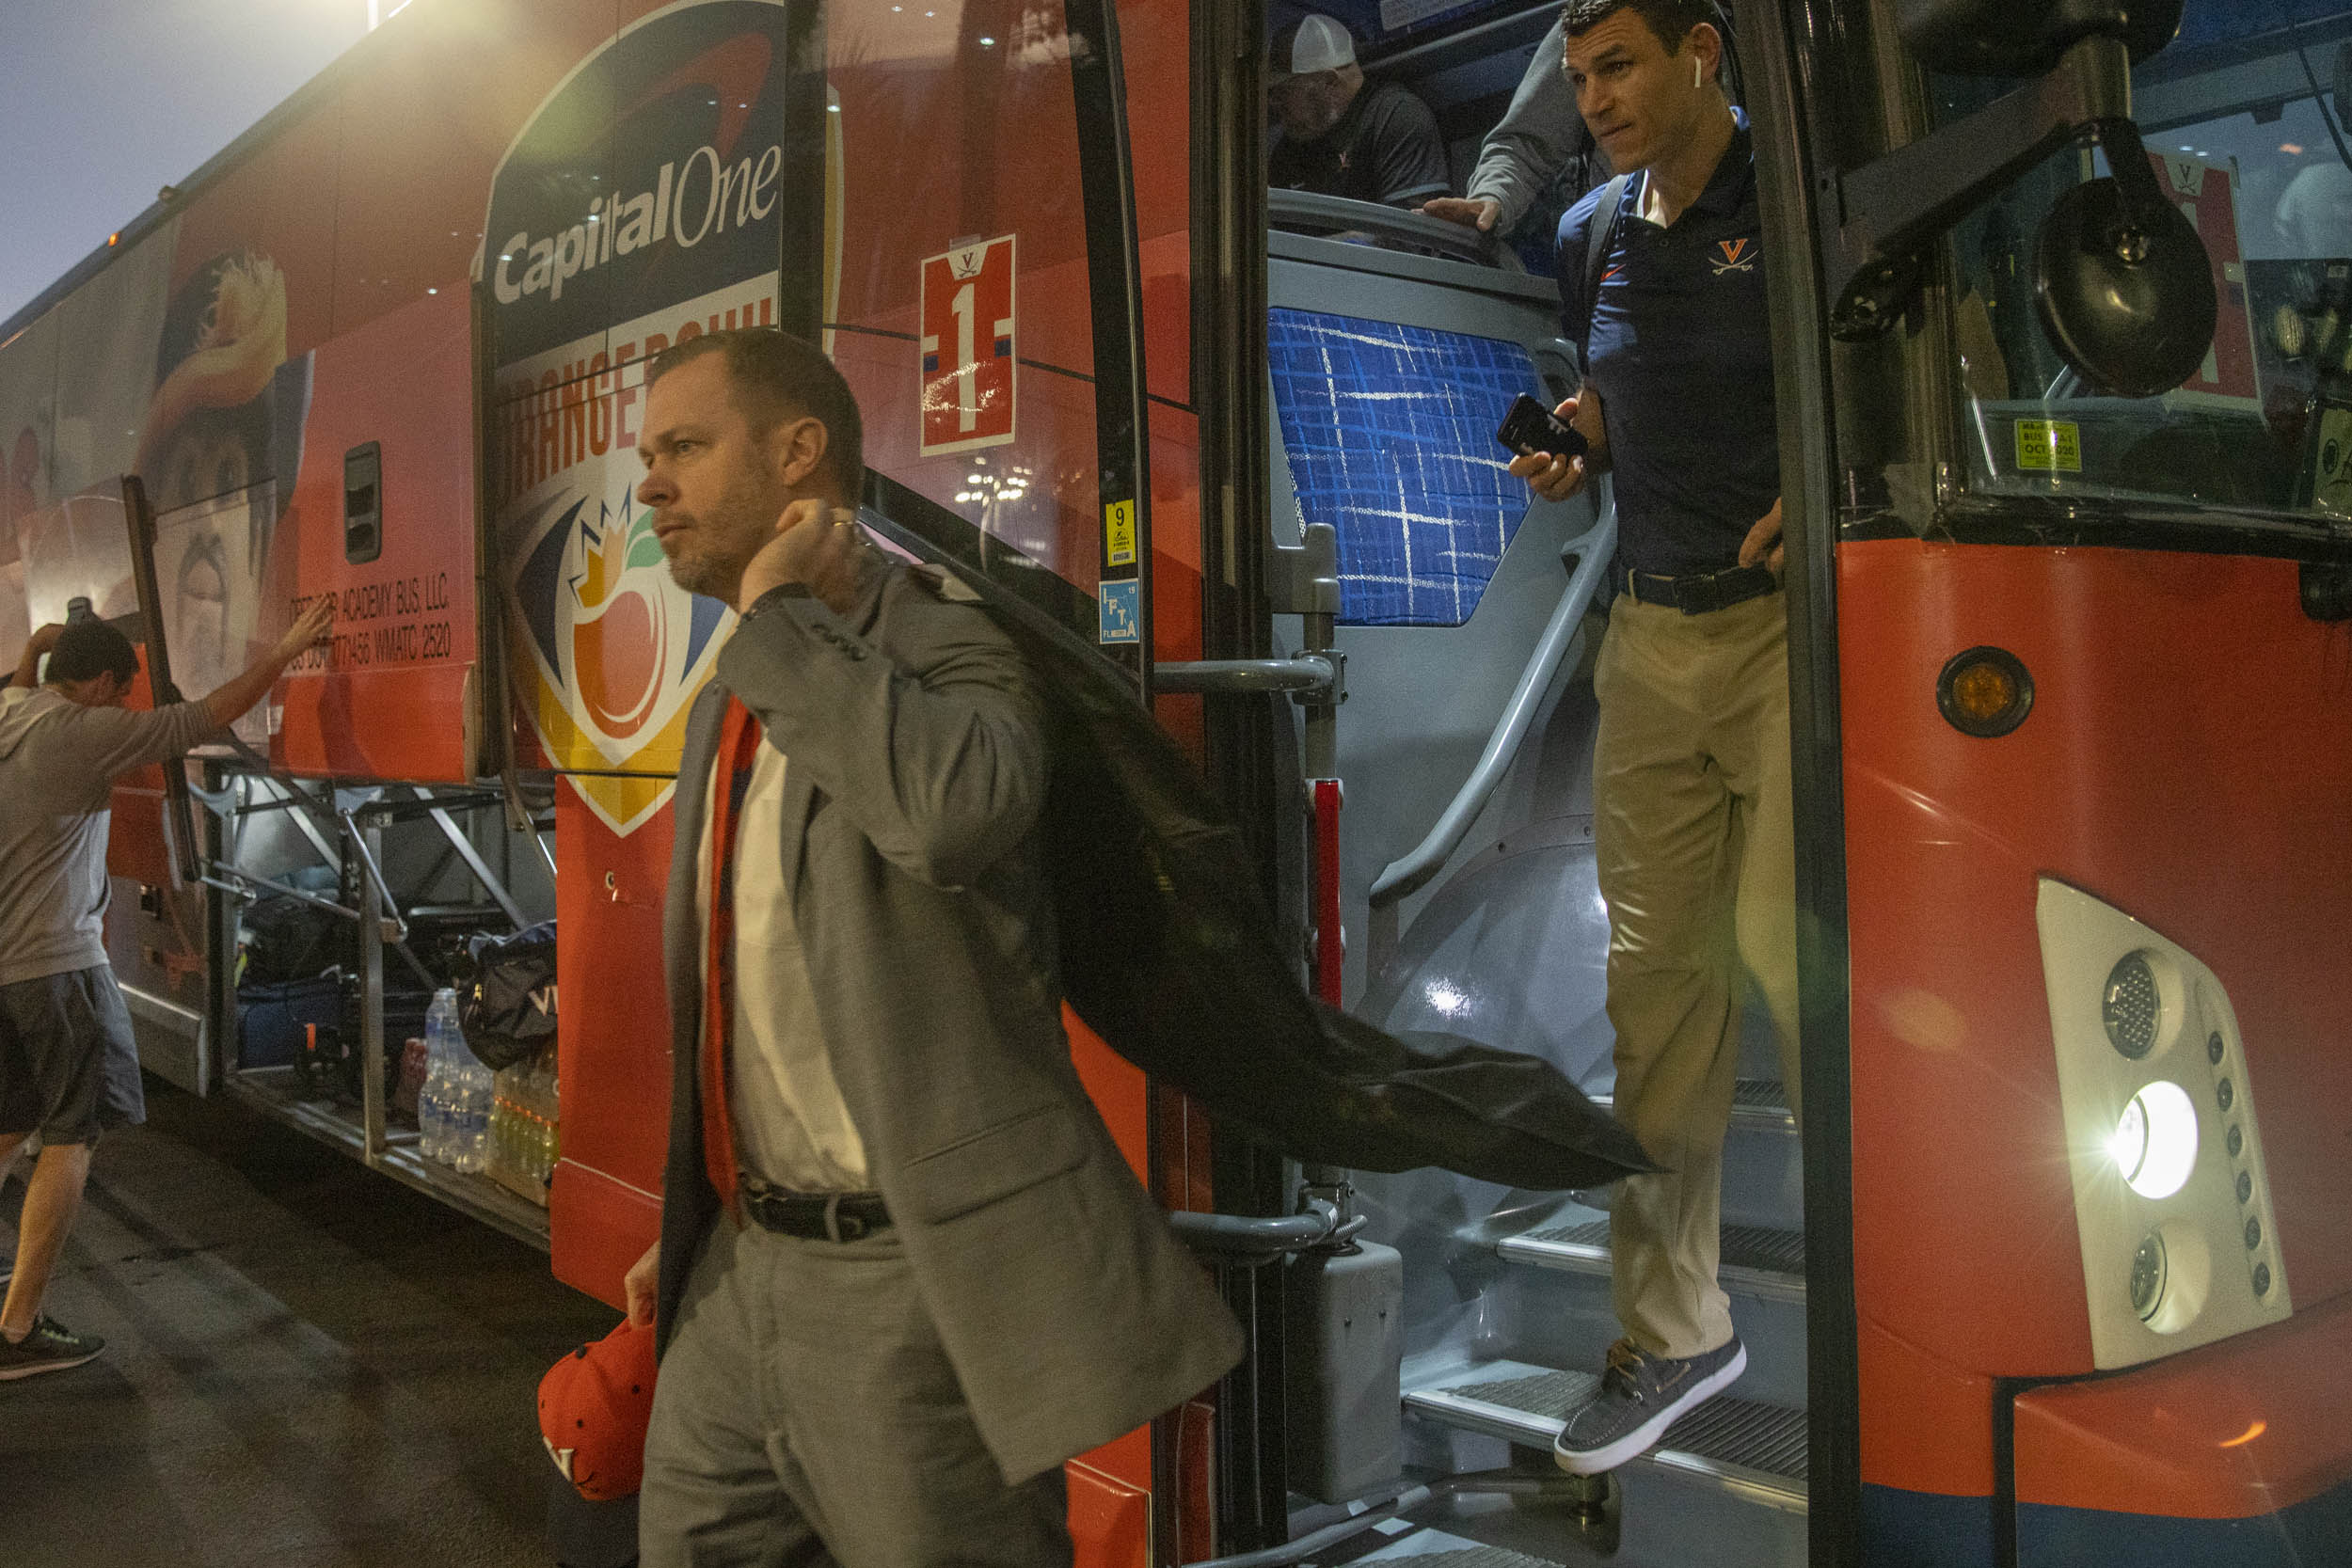 Mendenhall leads his team off the bus 